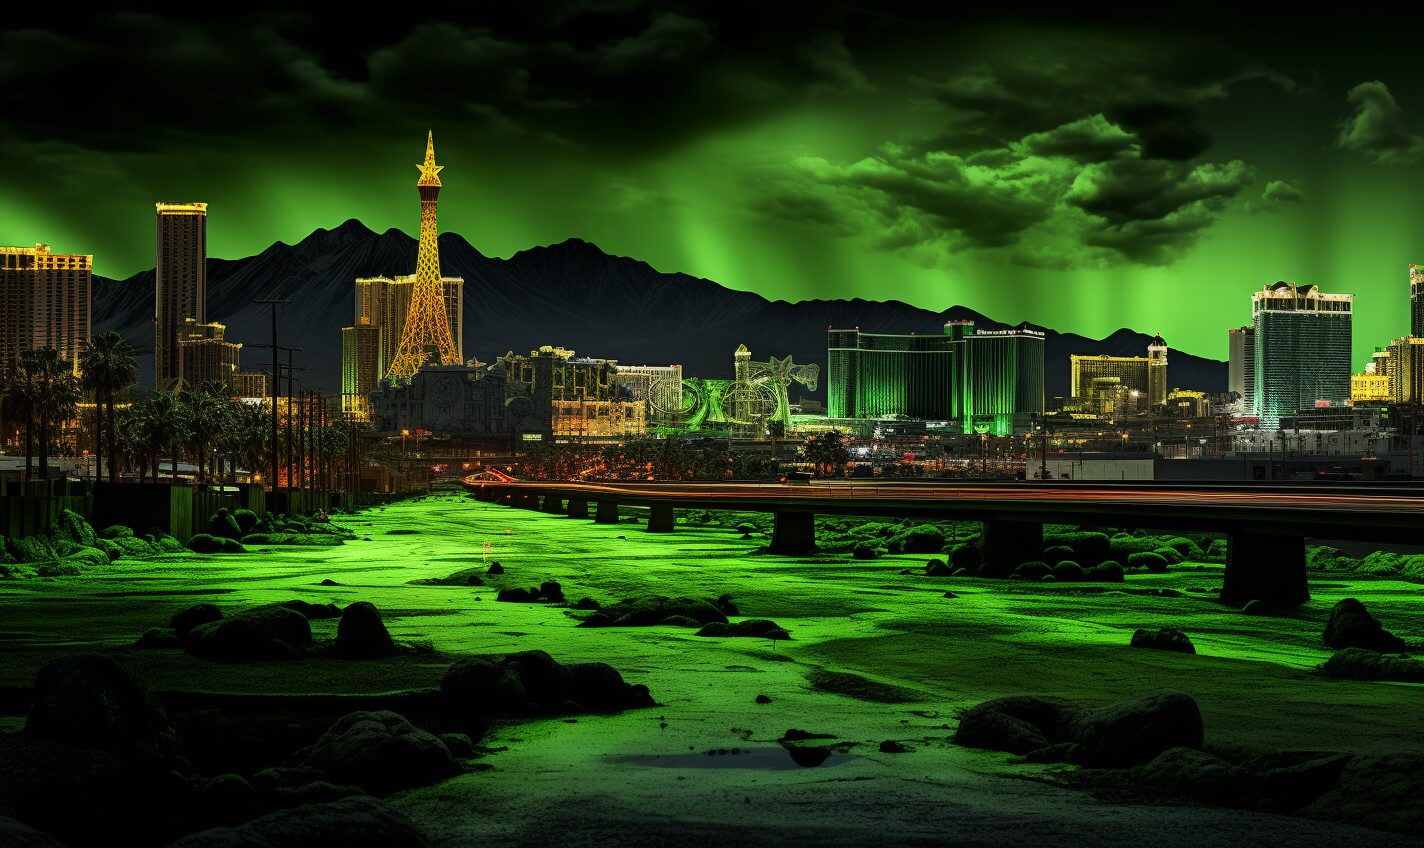 henderson, nevada in a black and neon green glow